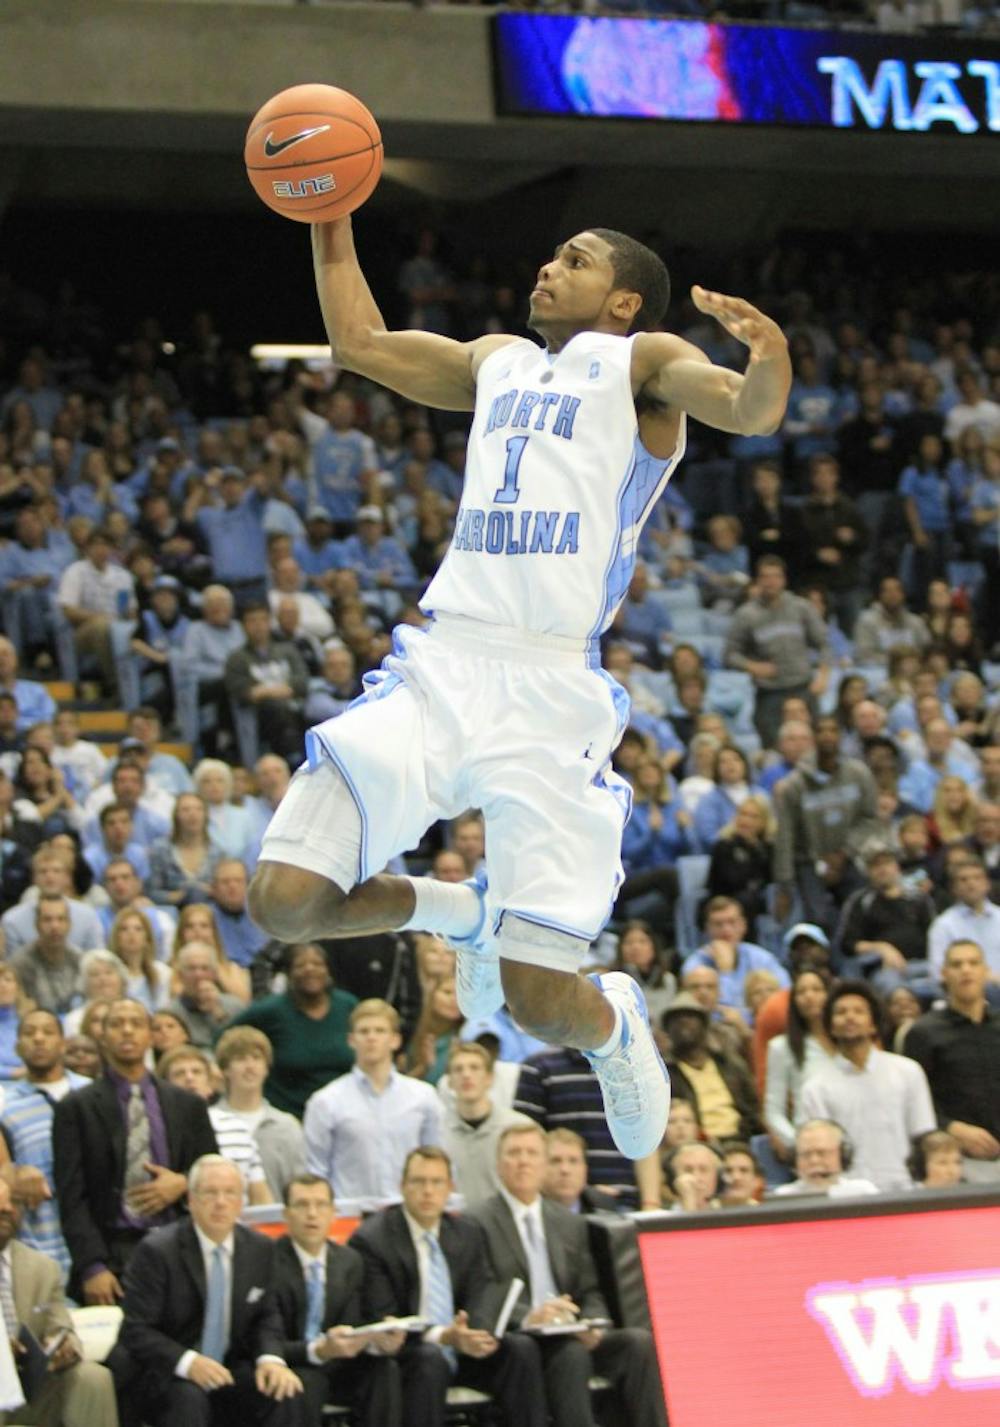 Dexter Strickland goes up for a layup on a fast break.